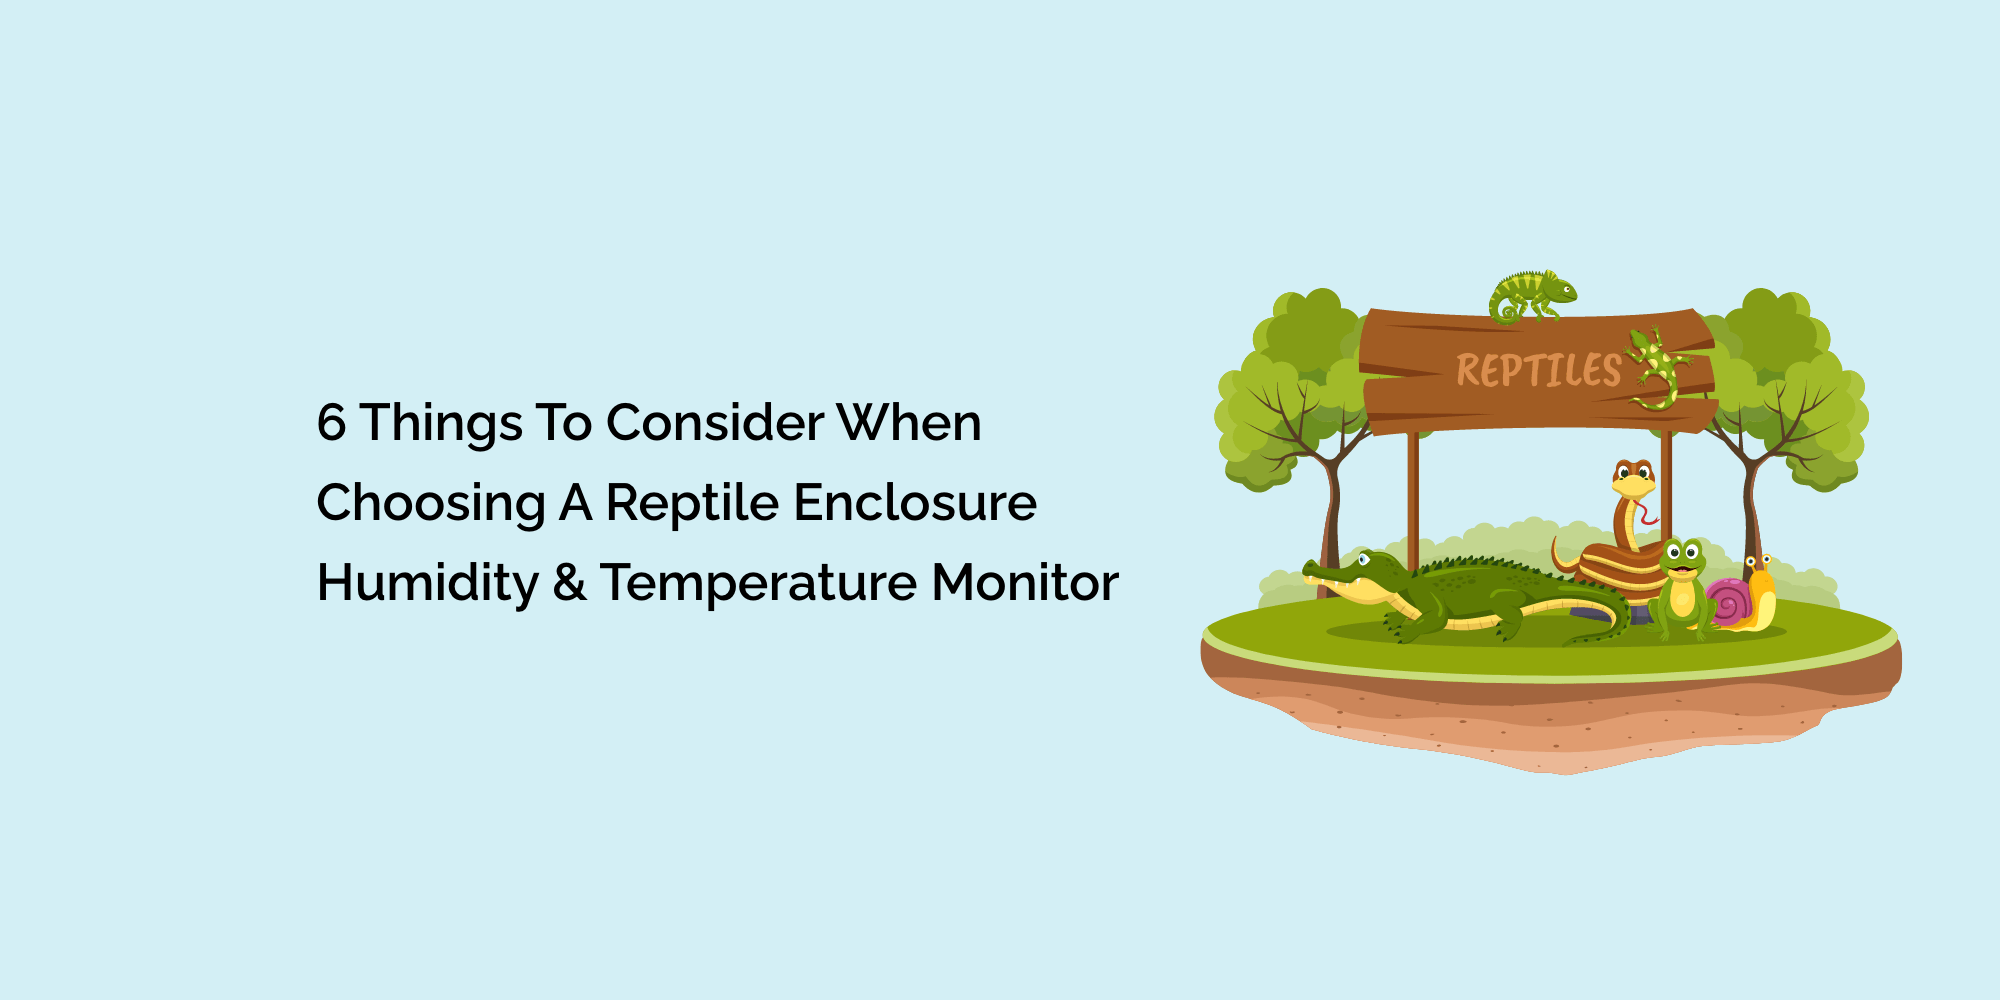 6 Things to Consider When Choosing a Reptile Enclosure Humidity & Temperature Monitor